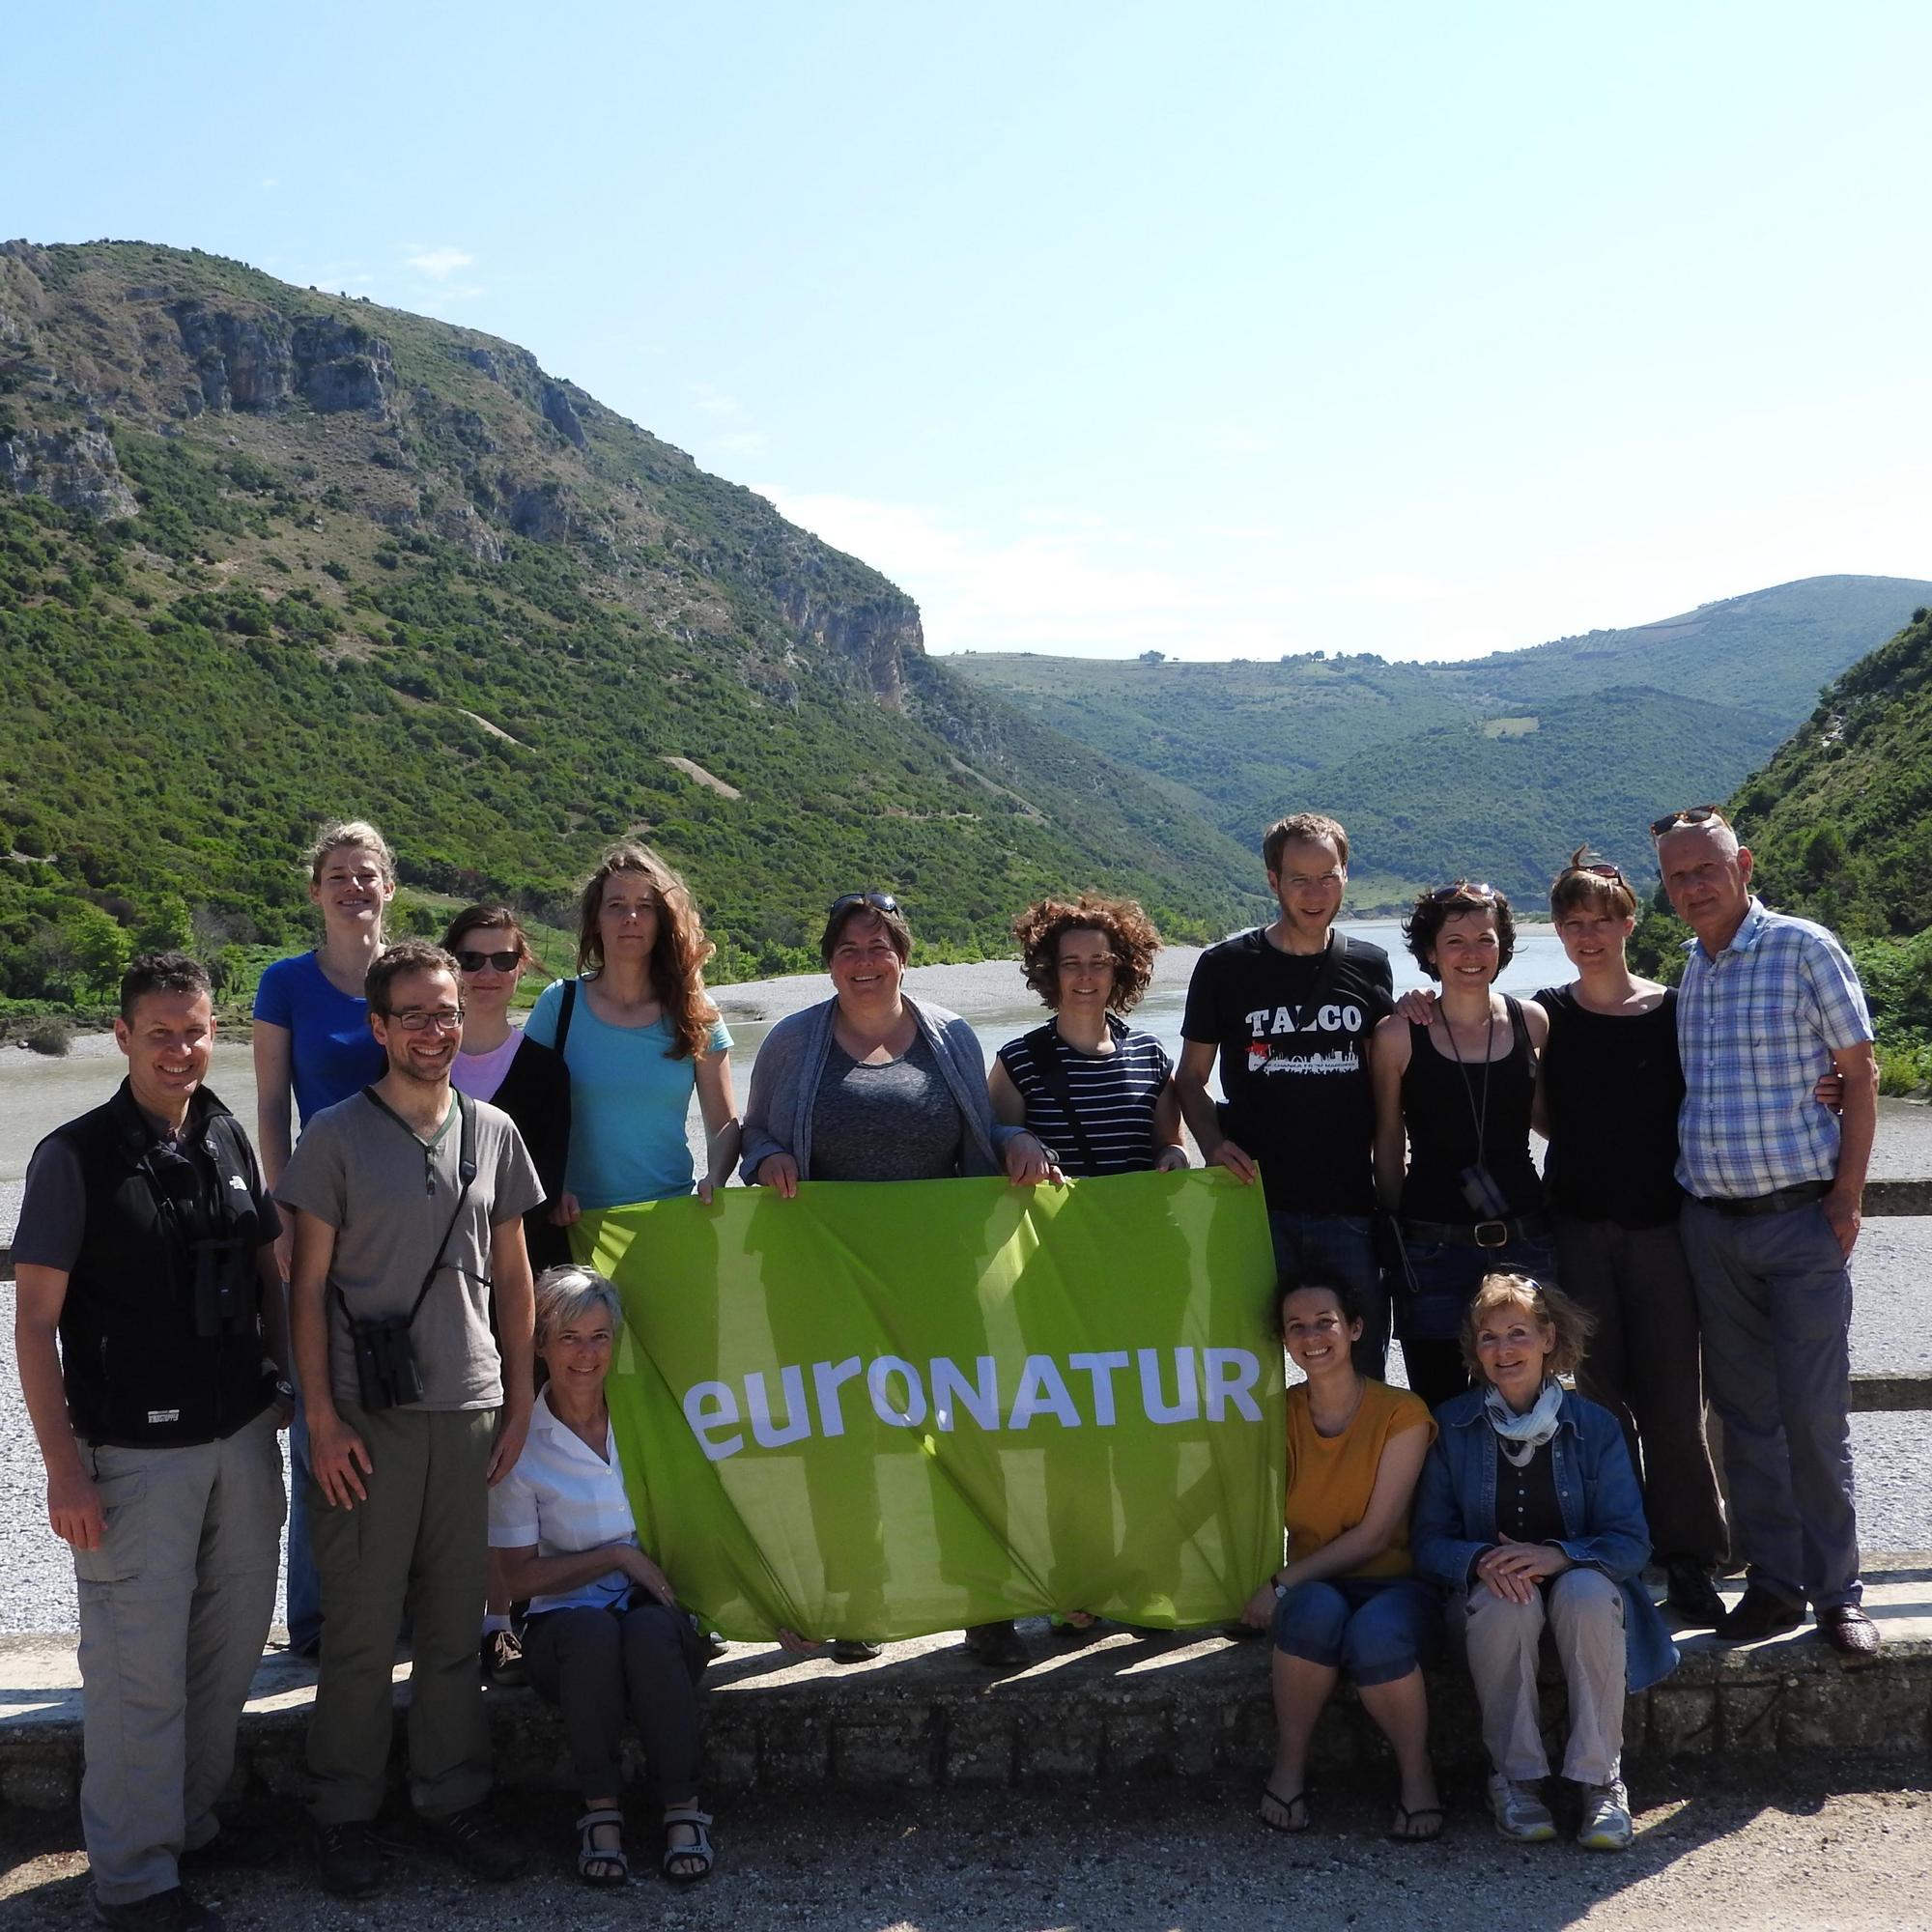 EuroNatur staff with EuroNatur flag in front of a river